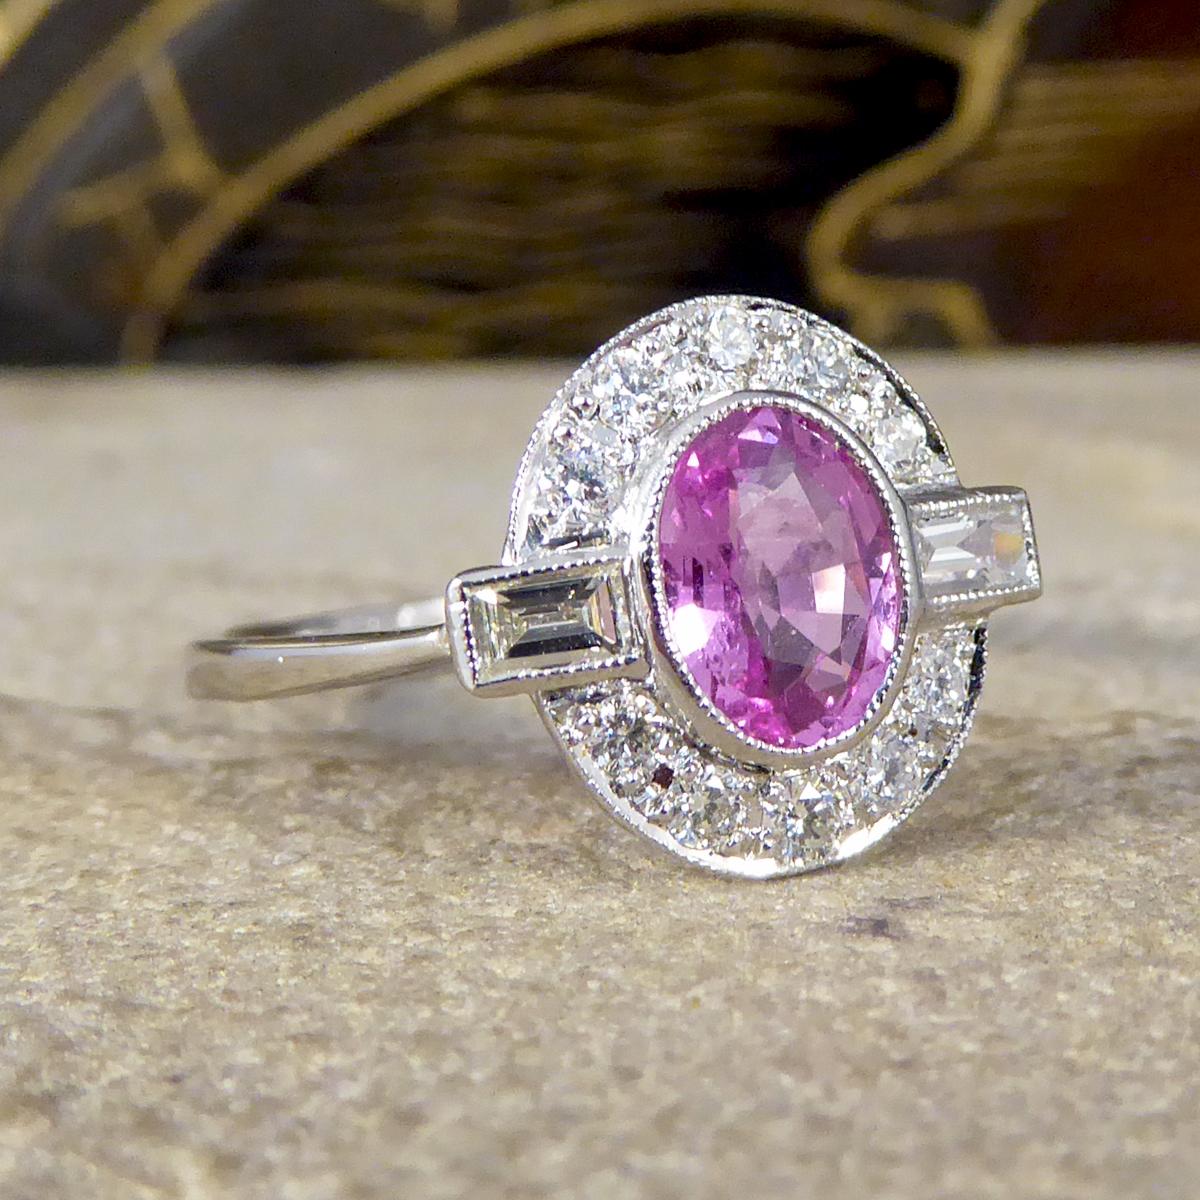 This captivating and pretty pink Sapphire weighs 0.95ct with a surround of Diamonds weighing 0.35ct in total of both modern brilliant cut and baguette cut Diamonds. All the gems are set in a rub over collar setting with a millegrain edge resembling